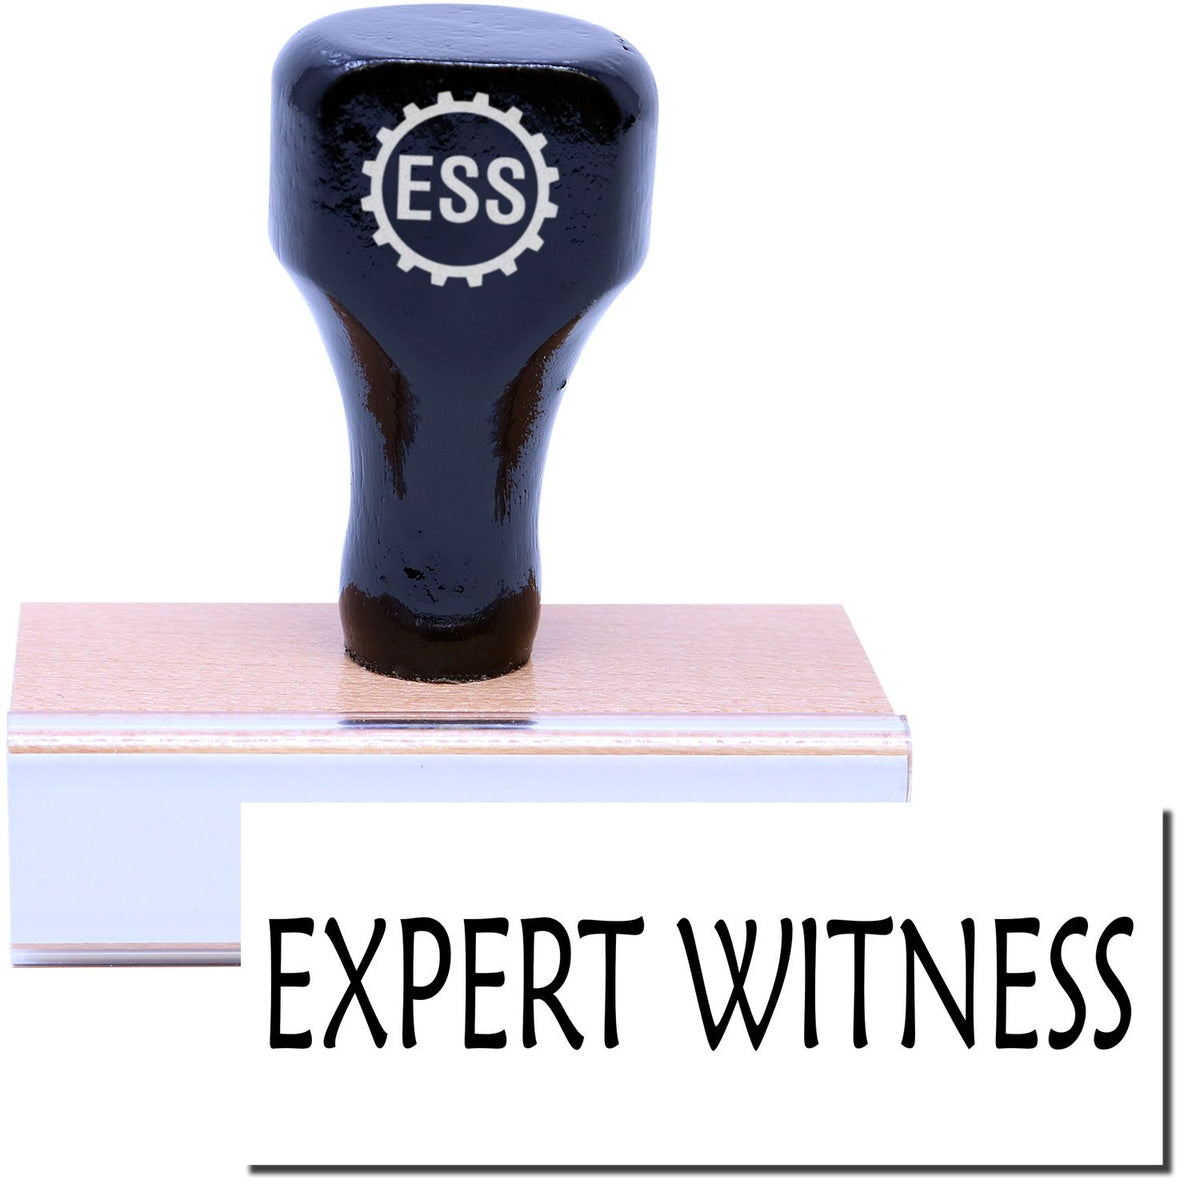 A stock office rubber stamp with a stamped image showing how the text &quot;EXPERT WITNESS&quot; in a large font is displayed after stamping.